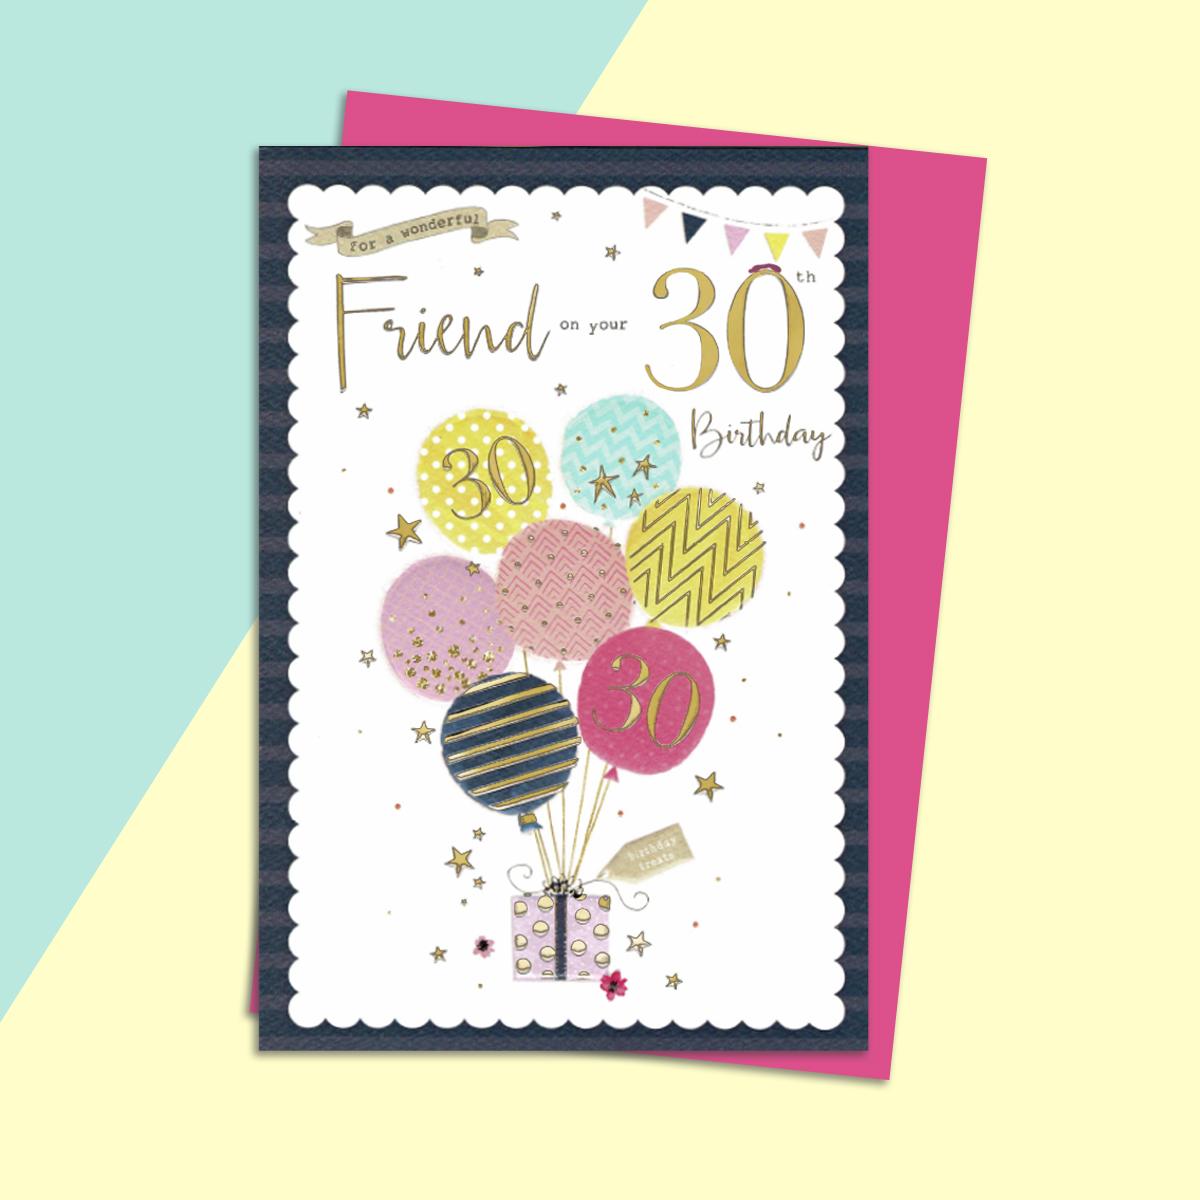 Friend Age 30 Birthday Card Complete With Magenta Envelope